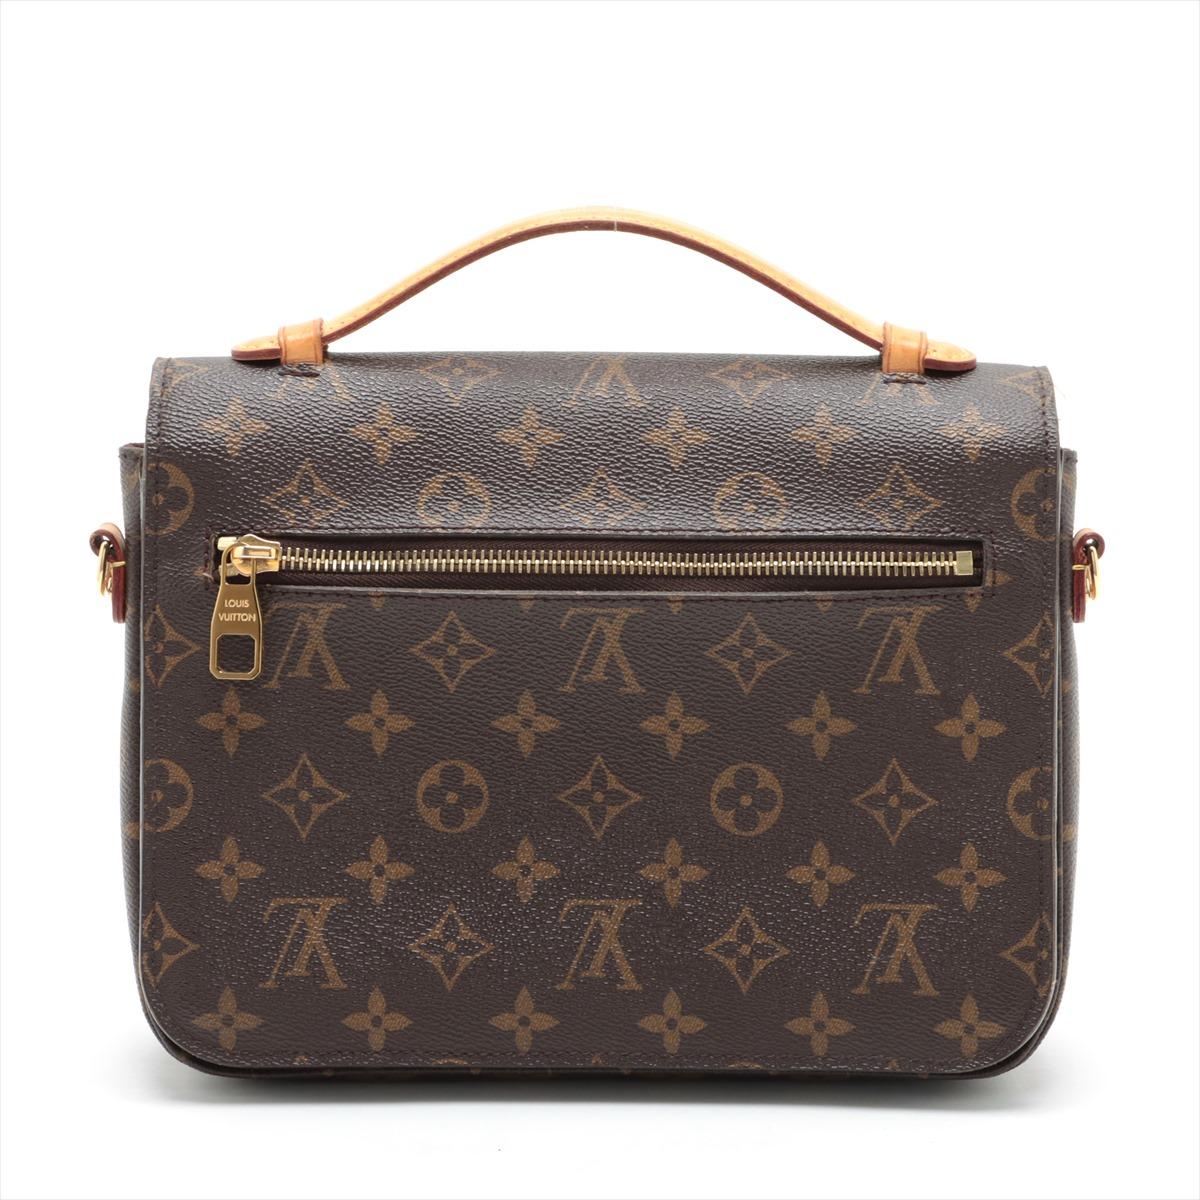 The Louis Vuitton Monogram Pochette Metis MM is a distinctive and coveted handbag that epitomizes the brand's commitment to sophistication and practicality. Impeccably crafted with the iconic Monogram canvas, the medium-sized masterpiece showcases